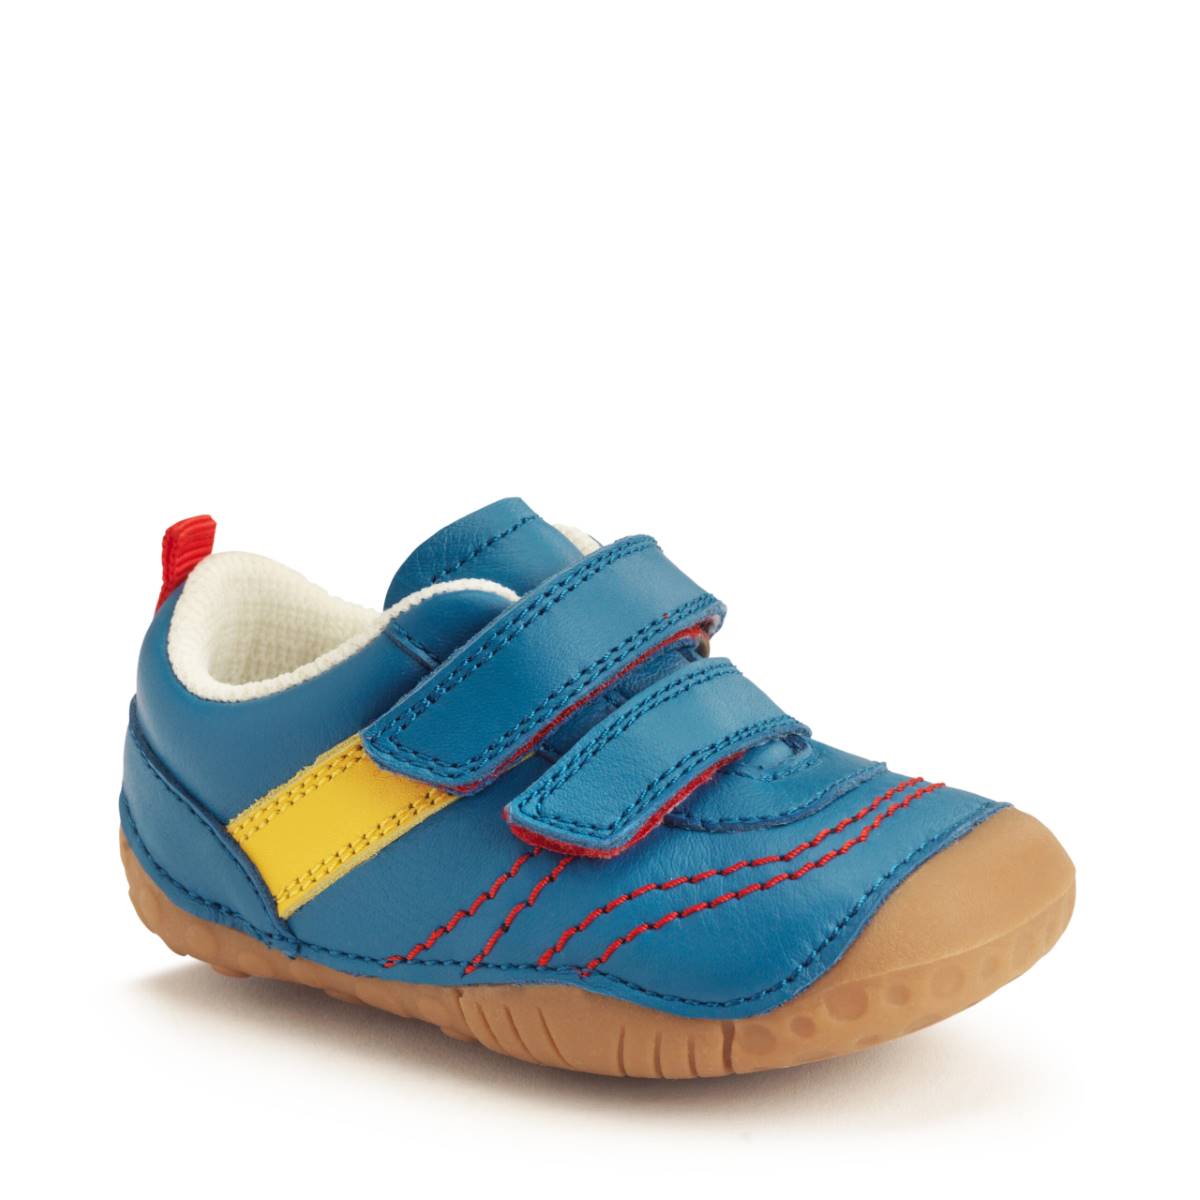 Start Rite Little Smile 2v BLUE LEATHER Kids Boys First Shoes 0823-26F in a Plain Leather in Size 4.5